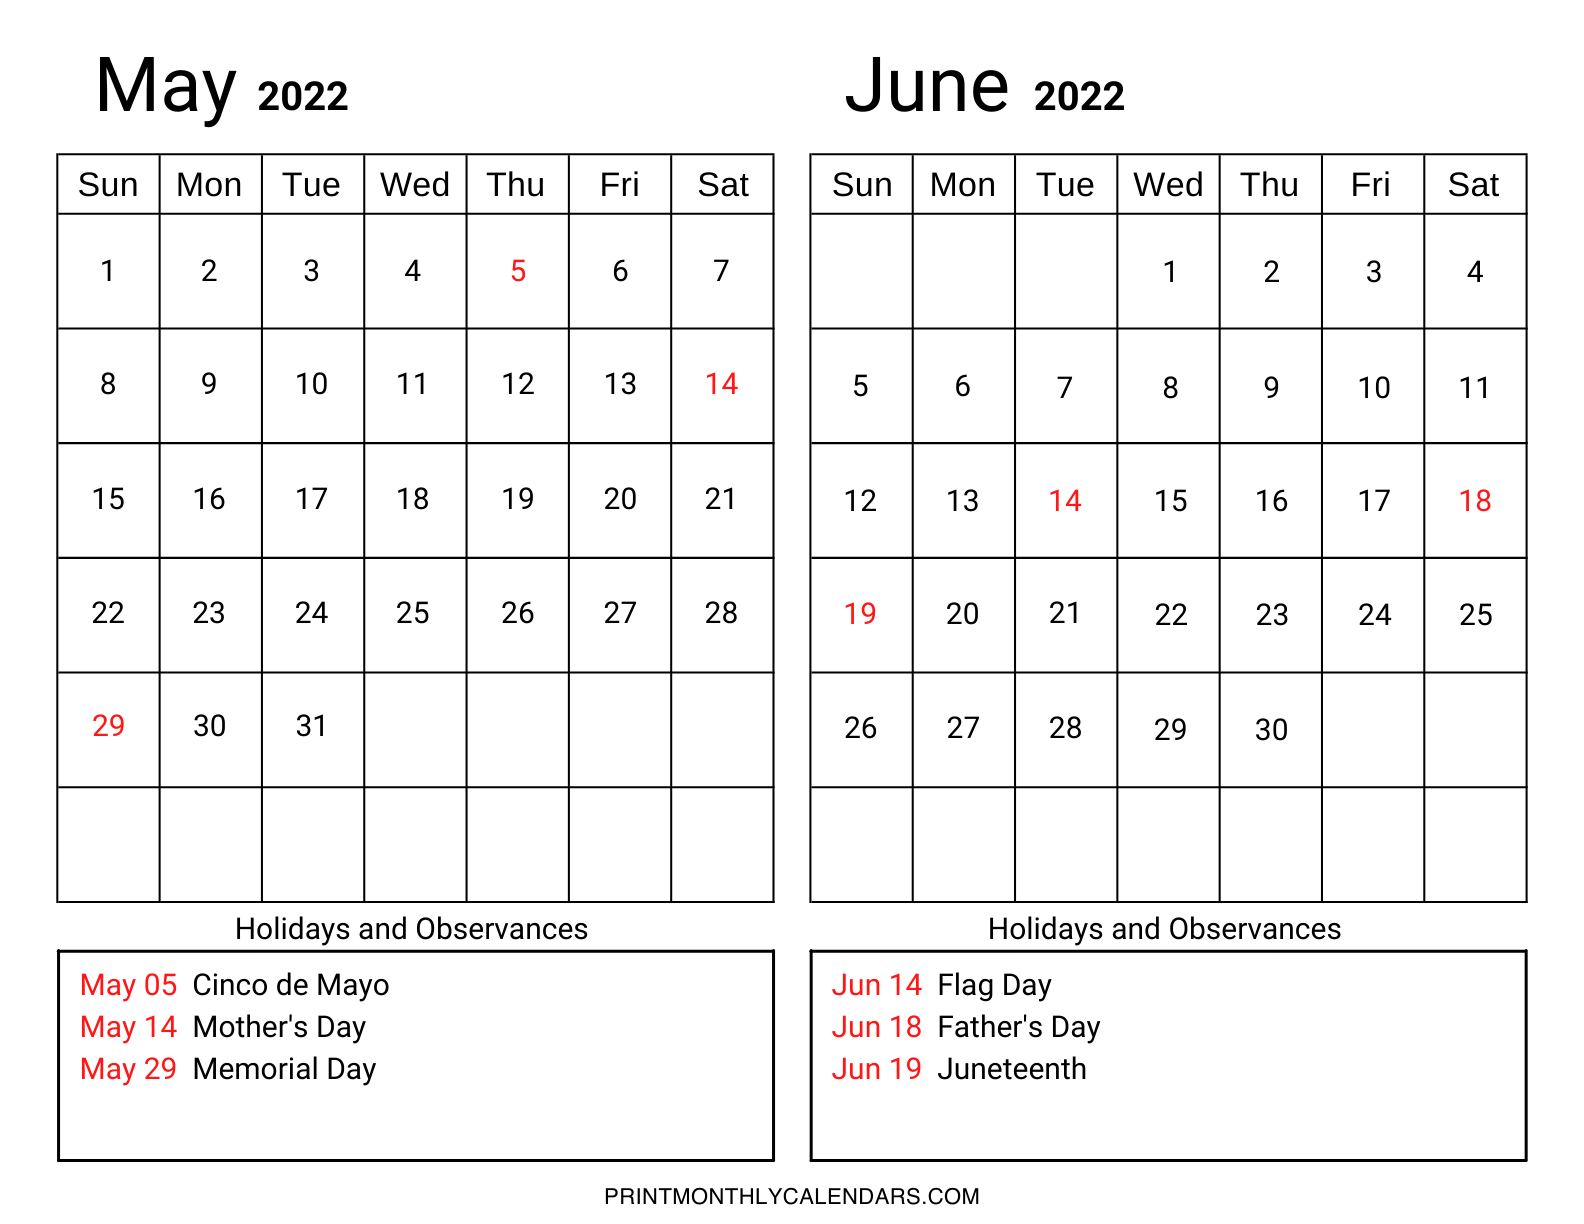 Calendar template for May and June 2022, including a list of US holidays and observances. The template's layout is landscape, and weekdays start from Sunday.